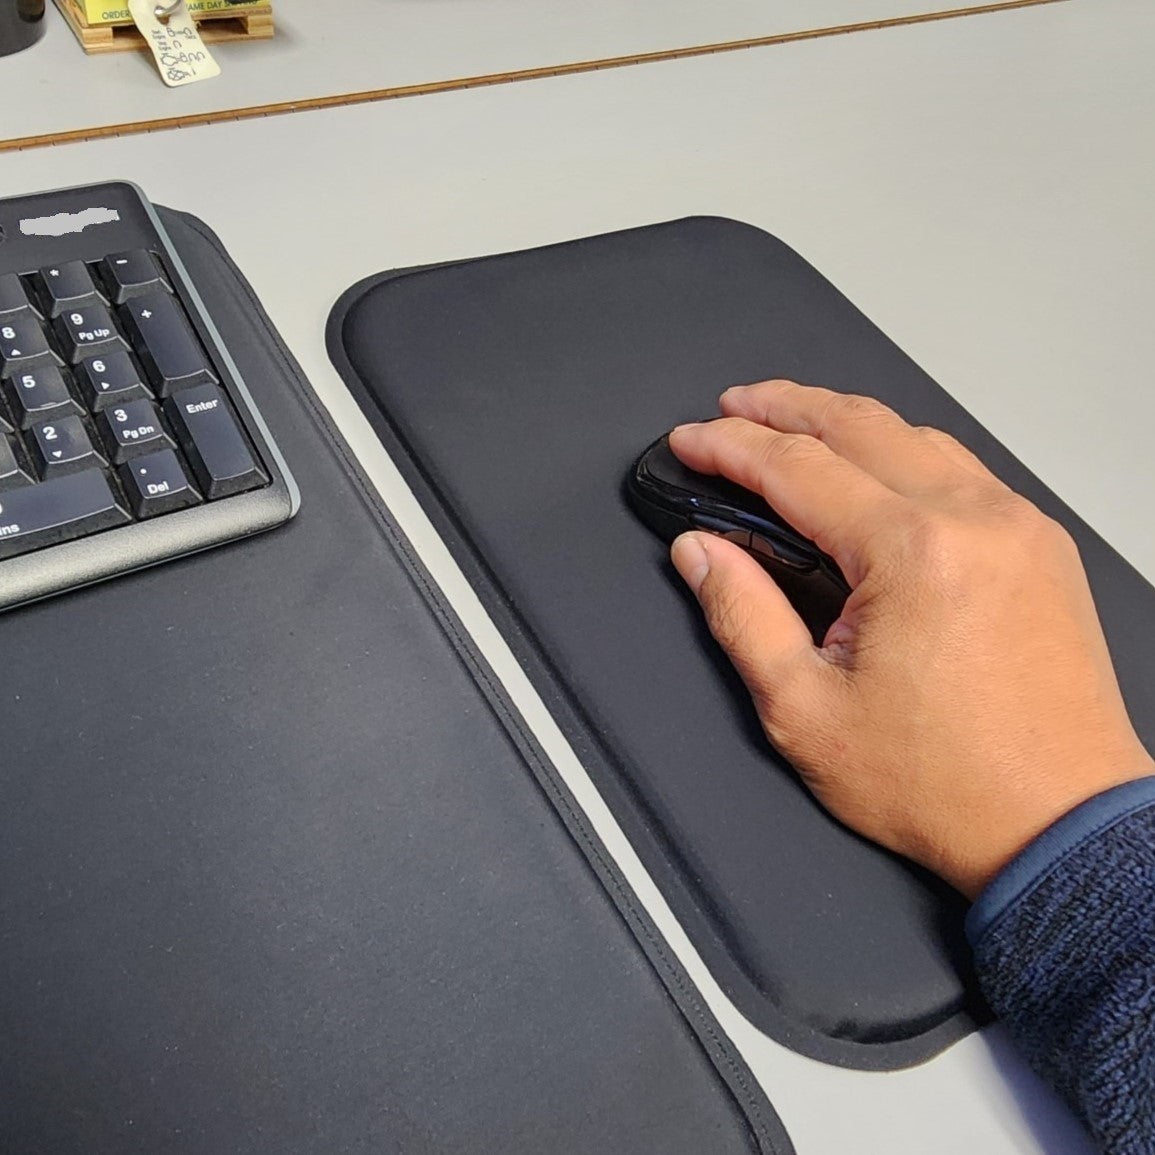 ULTRAGEL Relieve Universal pad All in One Mouse, Hand, Wrist, Arm Rest and Computer Gel Pad